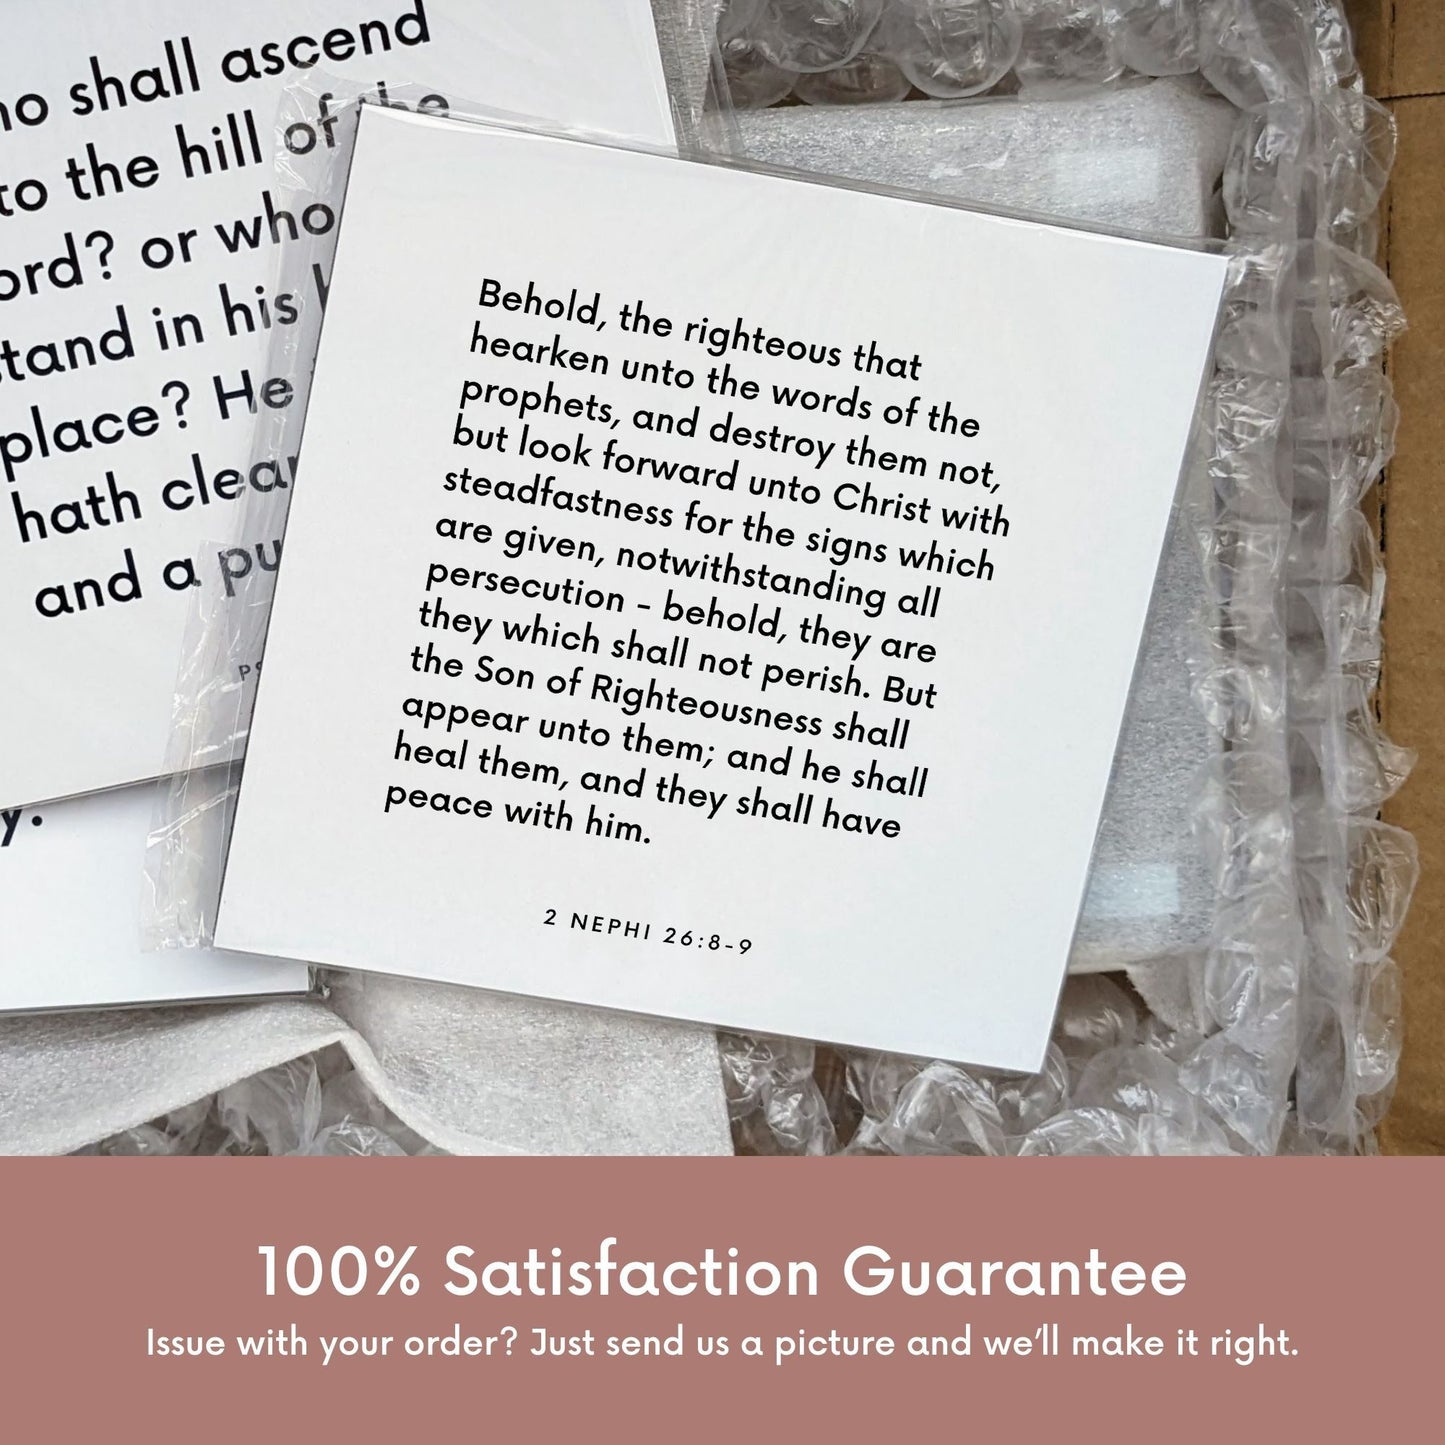 Shipping materials for scripture tile of 2 Nephi 26:8-9 - "Look forward unto Christ with steadfastness"